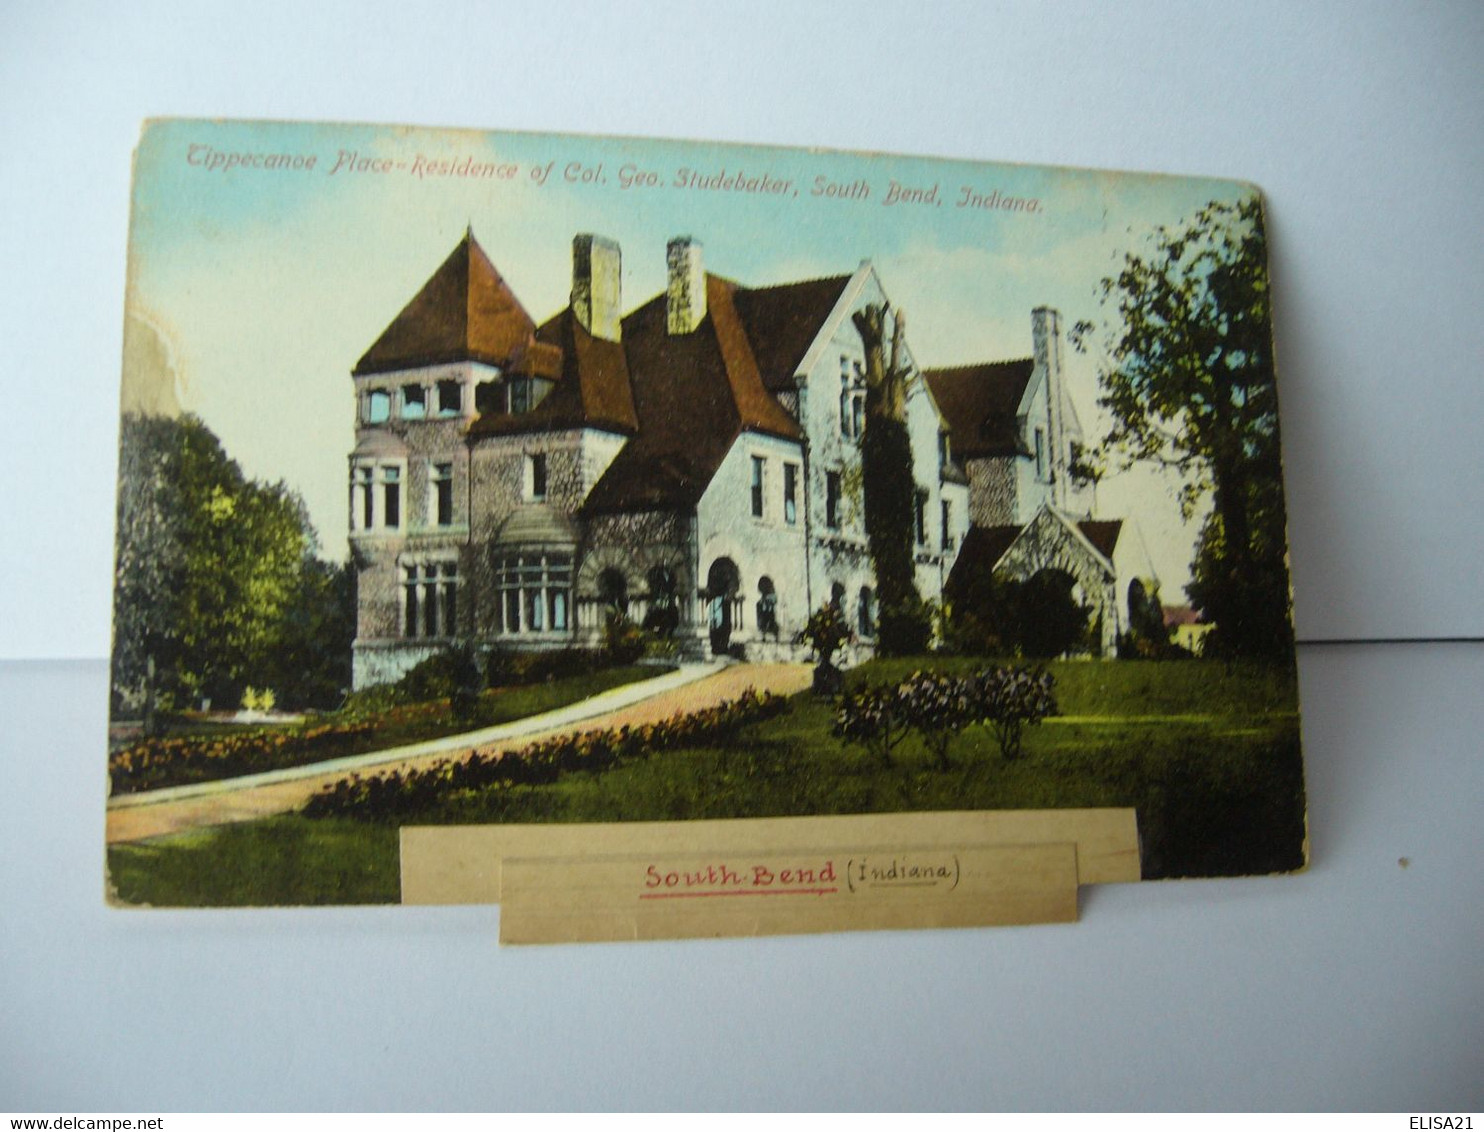 TIPPECANOE PLACE RESIDENCE OF COL GEO STUDEBAKER SOUTH BEND INDIANA ETATS UNIS USA CPA - South Bend